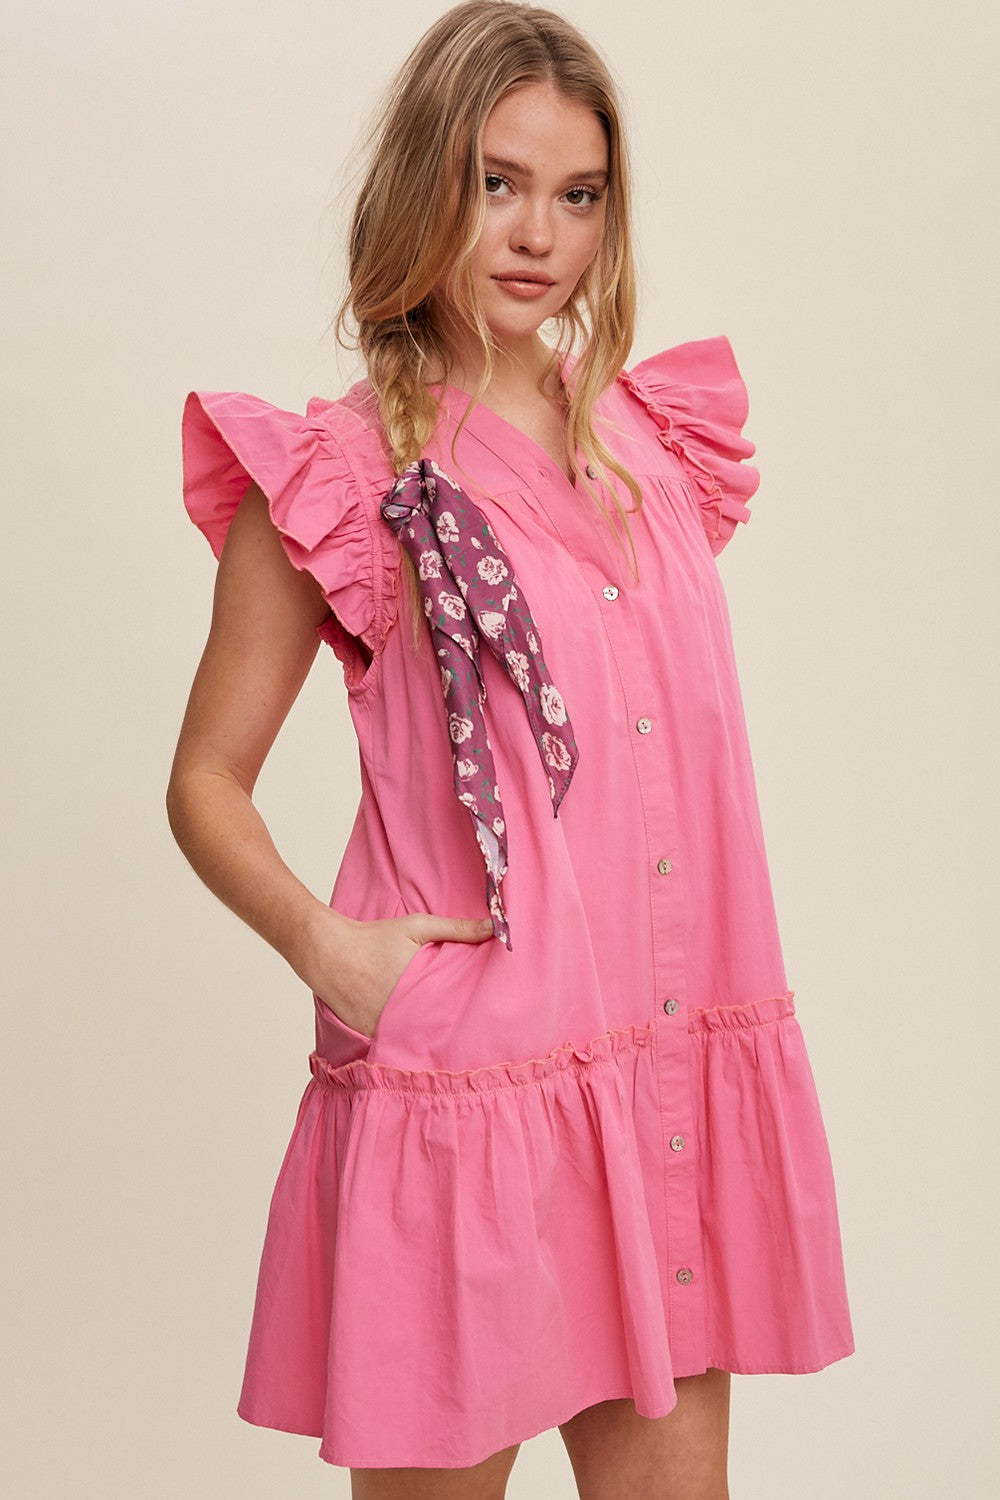 Bright Pink Button Down Dress With Ruffle Sleeves